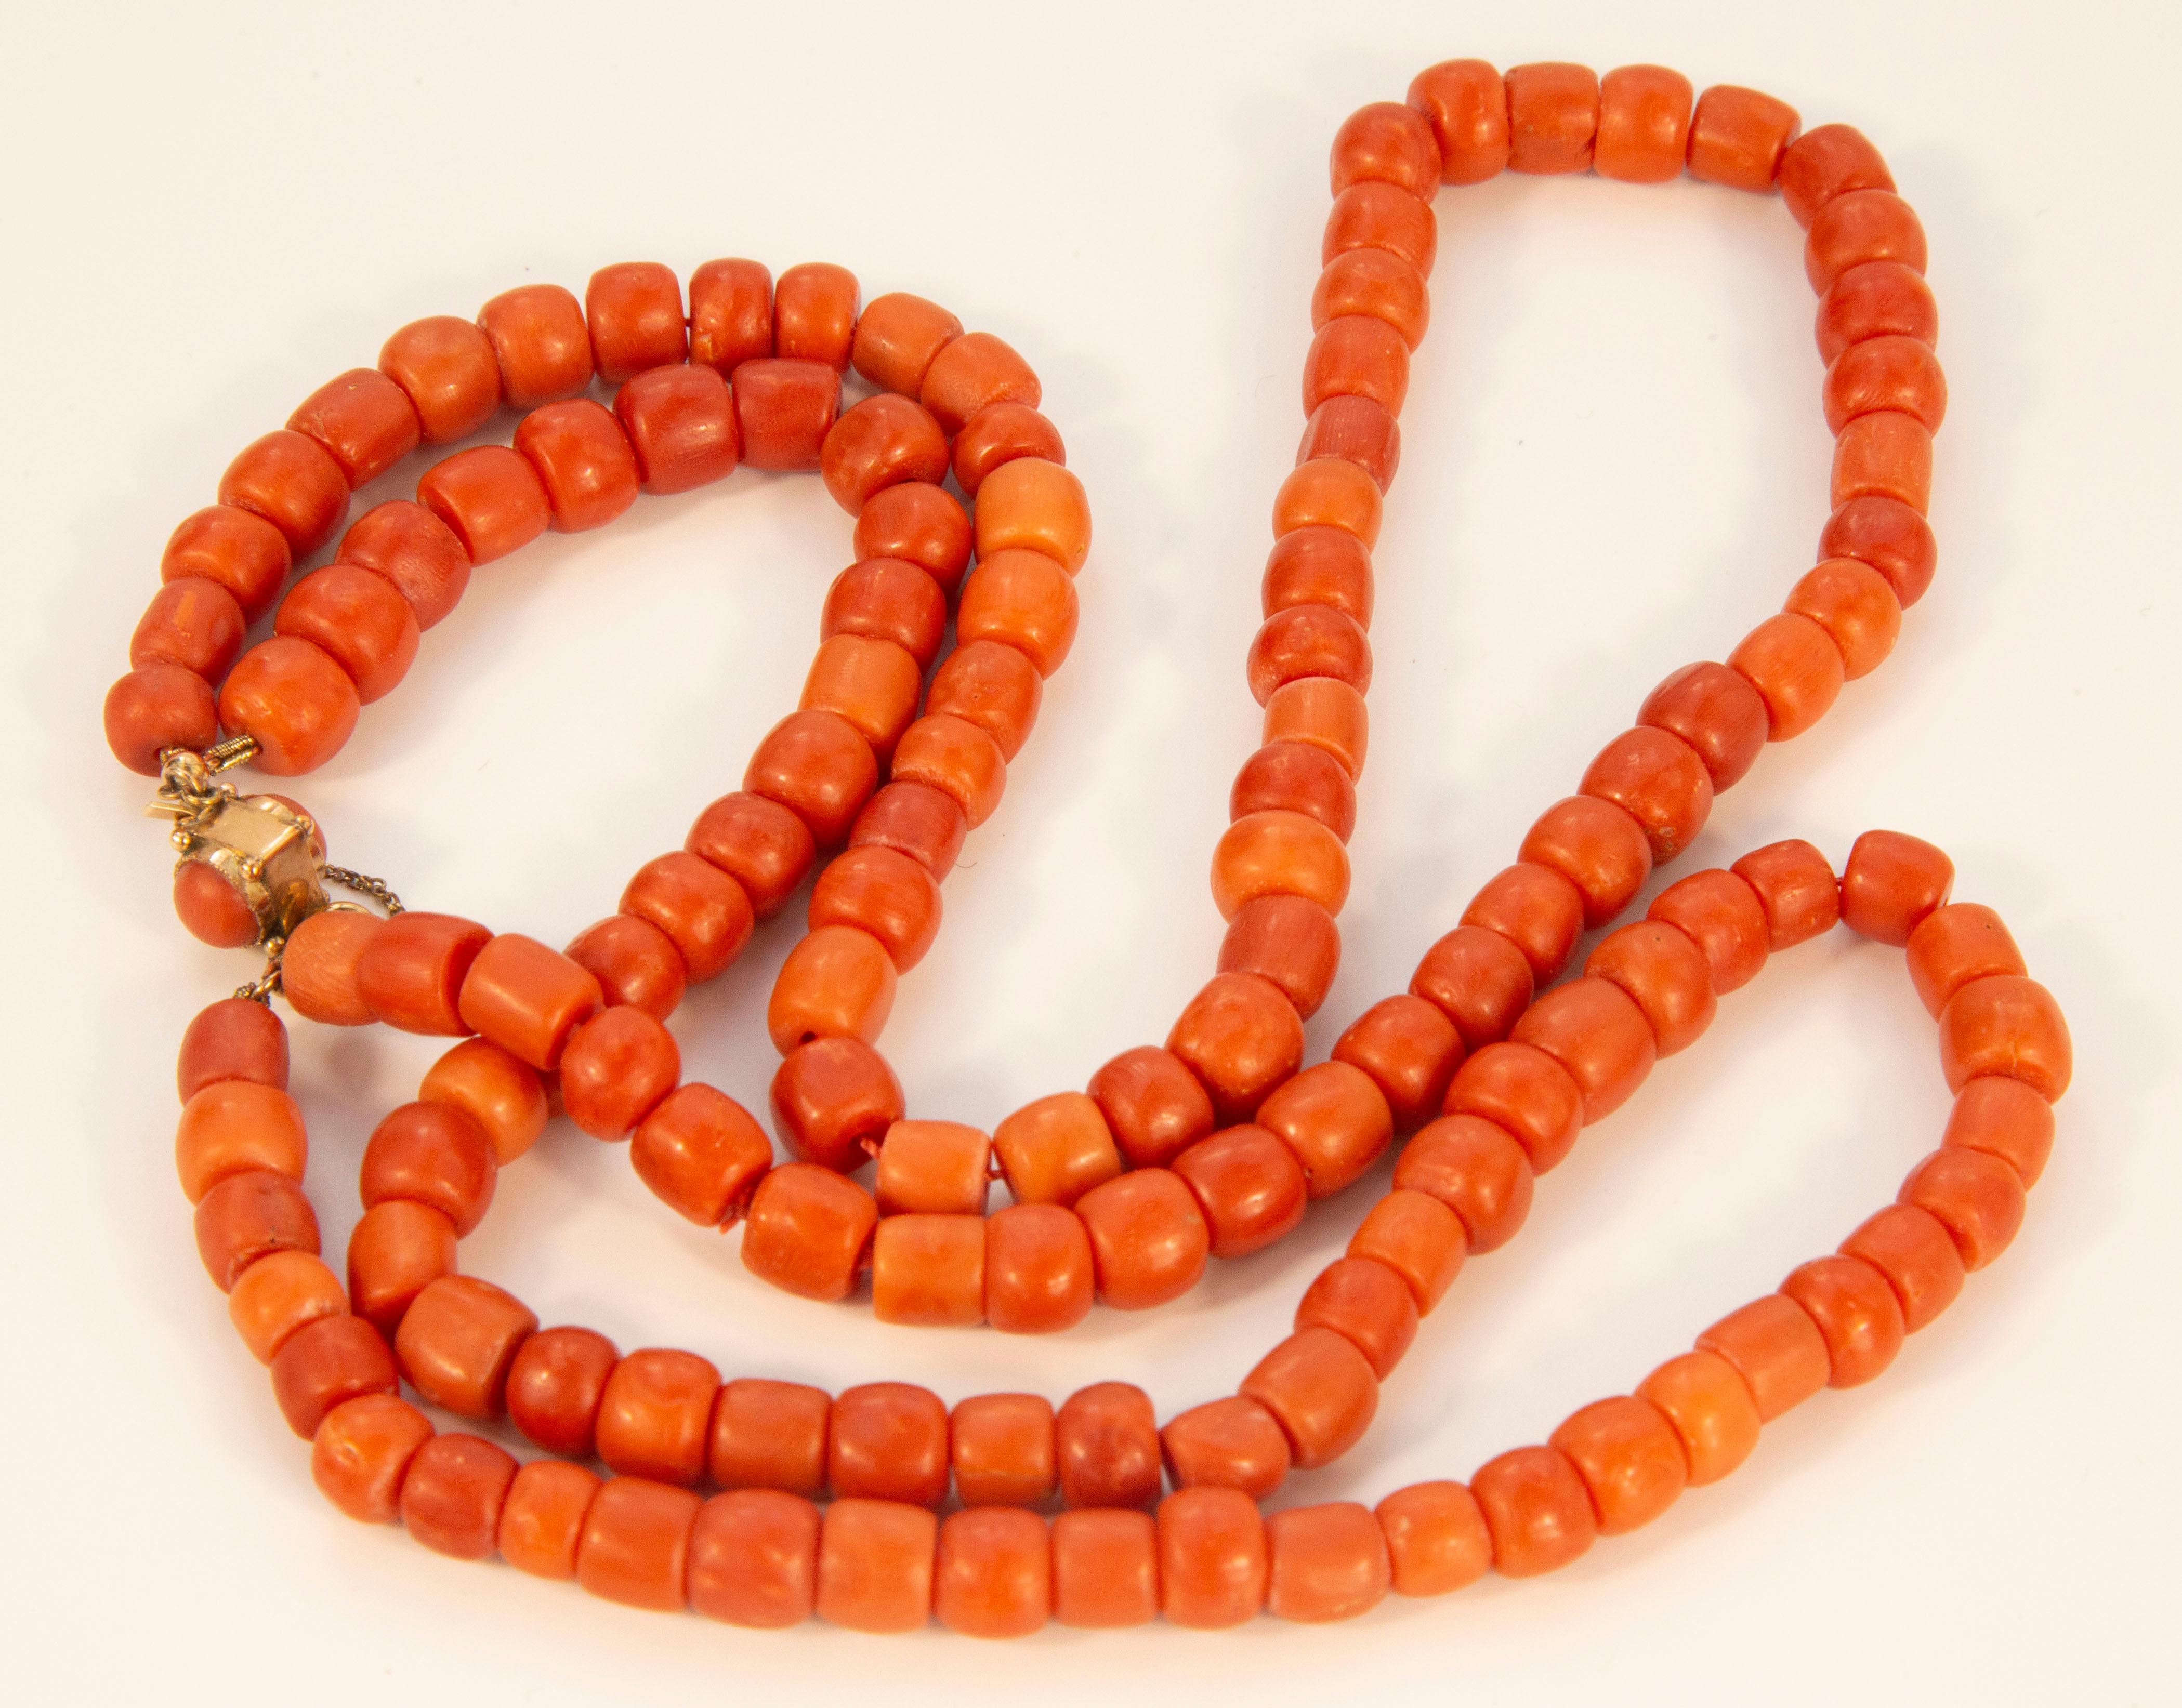 Antique Two Strand Red Coral Necklace with a 14 Karat Rose Gold Barrel Lock For Sale 1